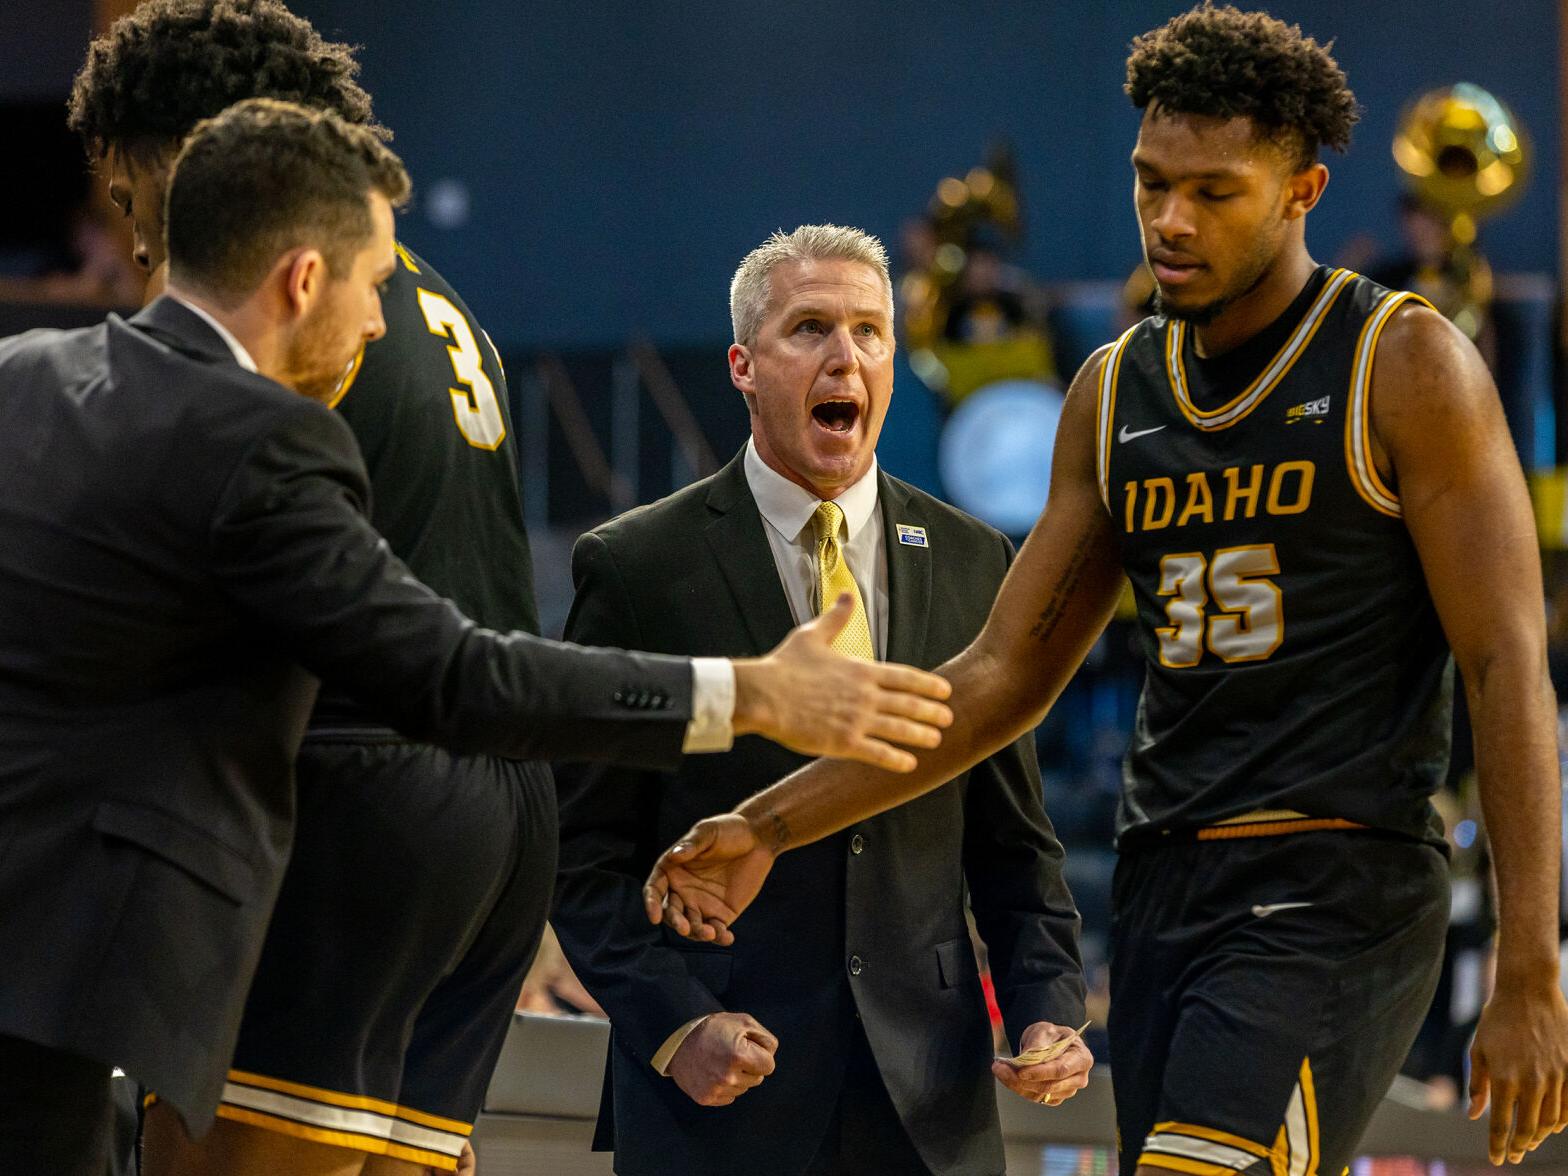 Idaho fires men's hoops coach Claus after regular season finale | Idaho  College Sports Coverage 